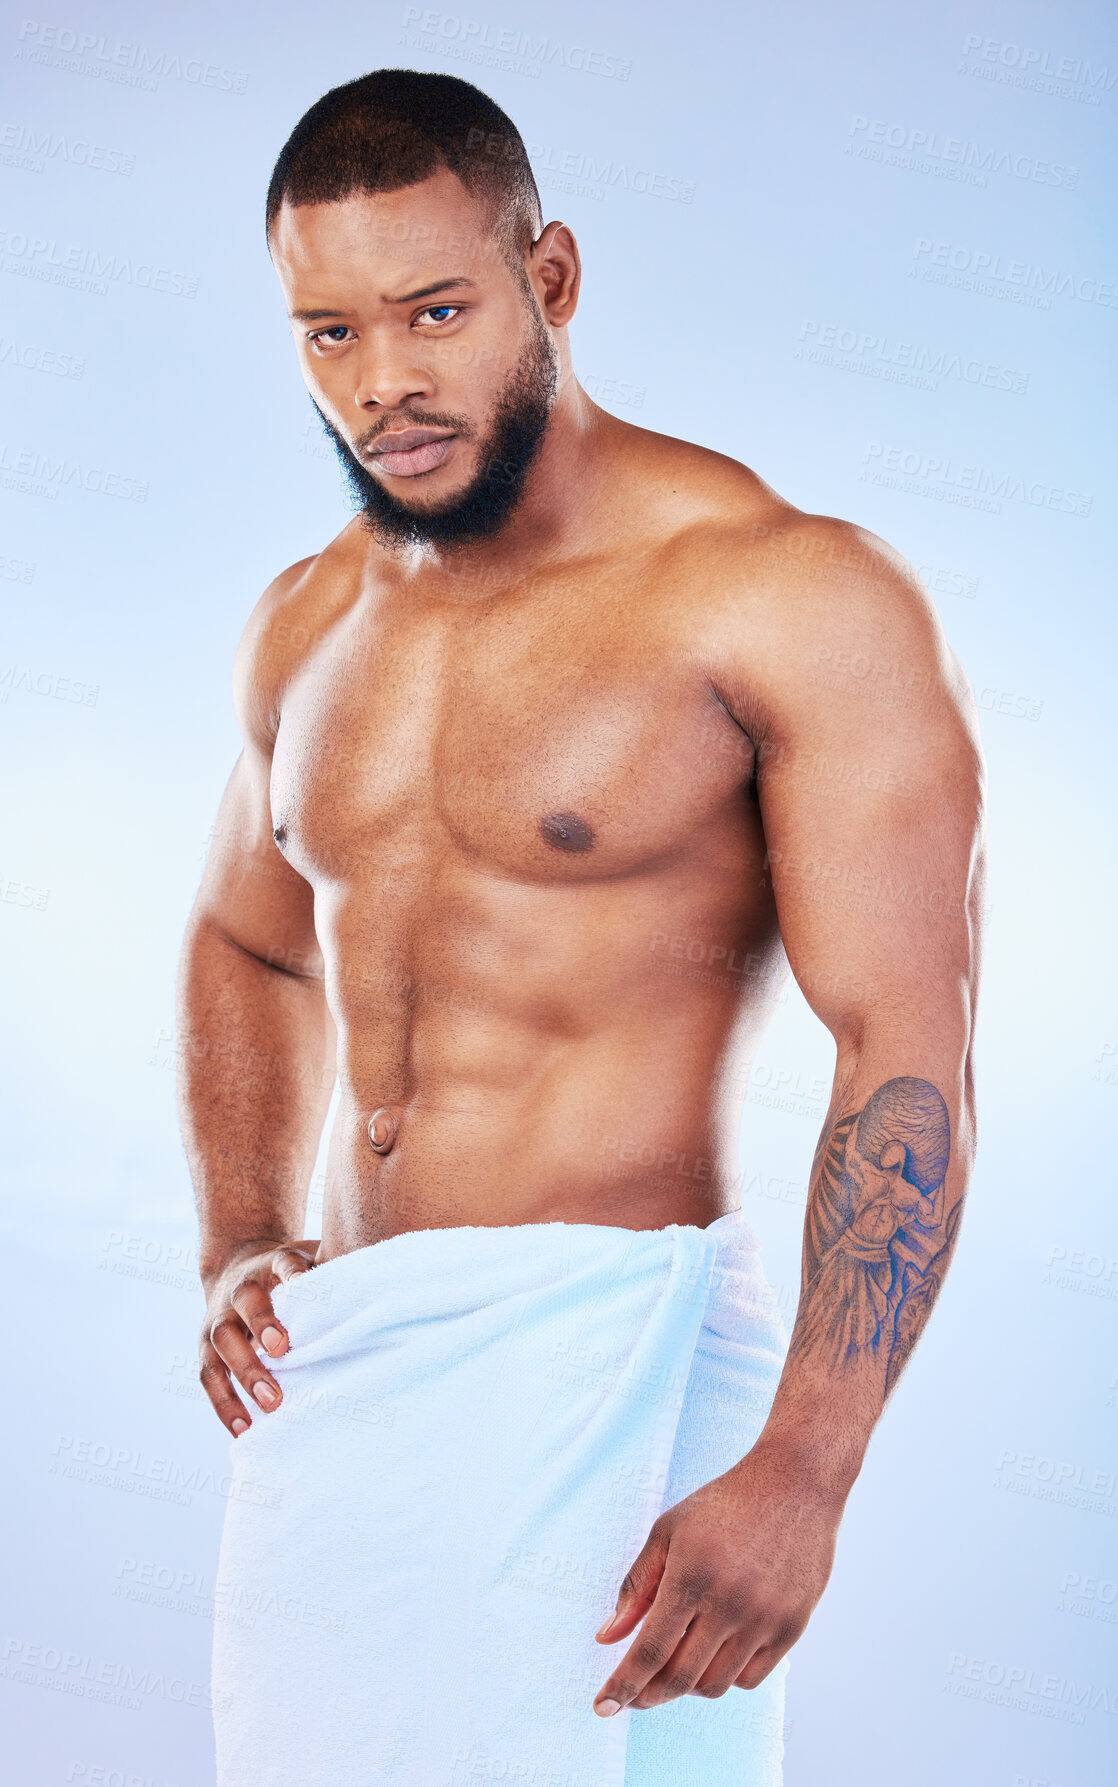 Buy stock photo Portrait, skincare and body with a man on white background and wearing a towel in studio after cleaning. Hygiene, grooming and serious muscular african male model posing shirtless in his bathroom